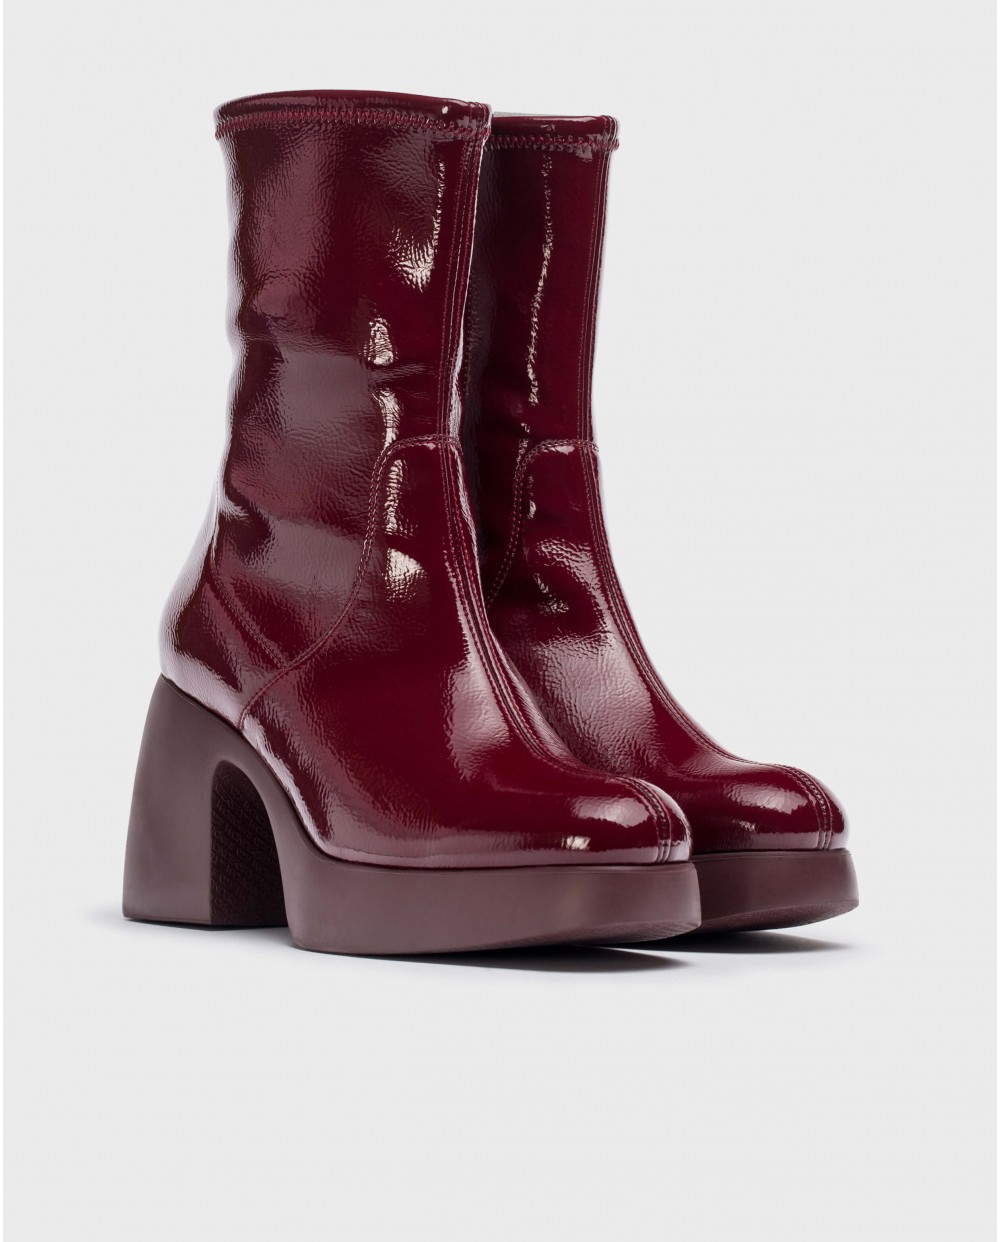 Wonders-Ankle Boots-Burgundy ERIS ankle boot